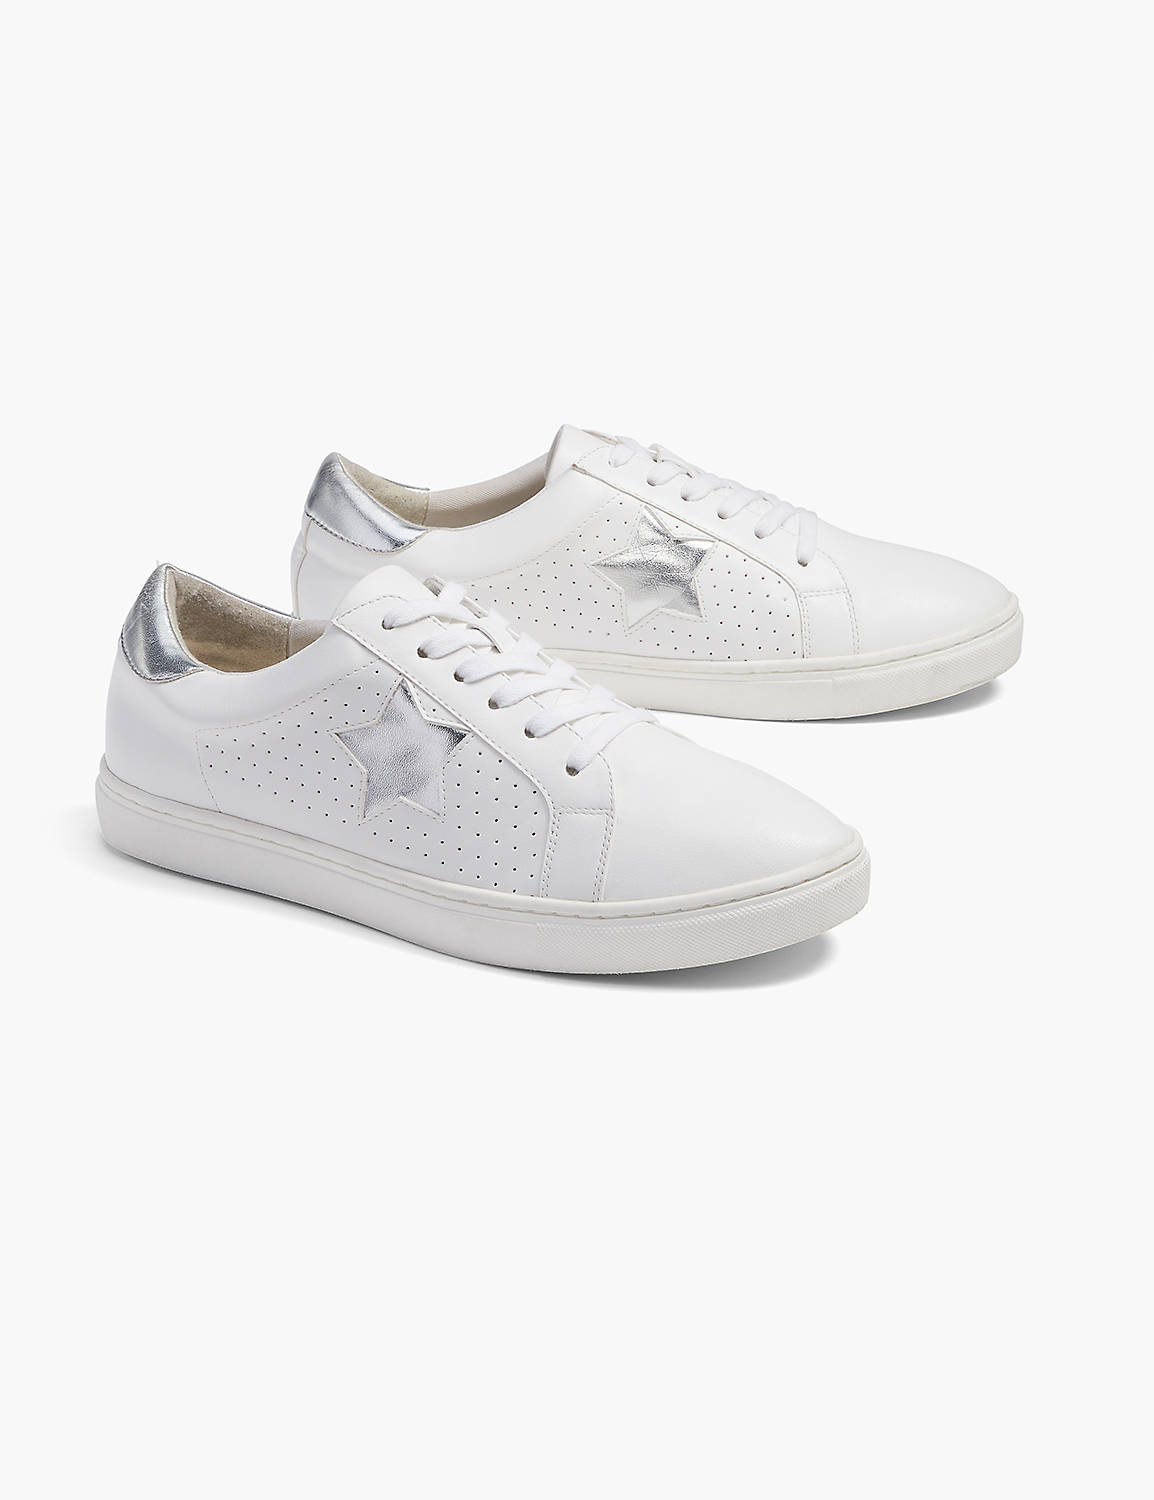 DREAM CLOUD Lace-Up Star Sneaker Product Image 1